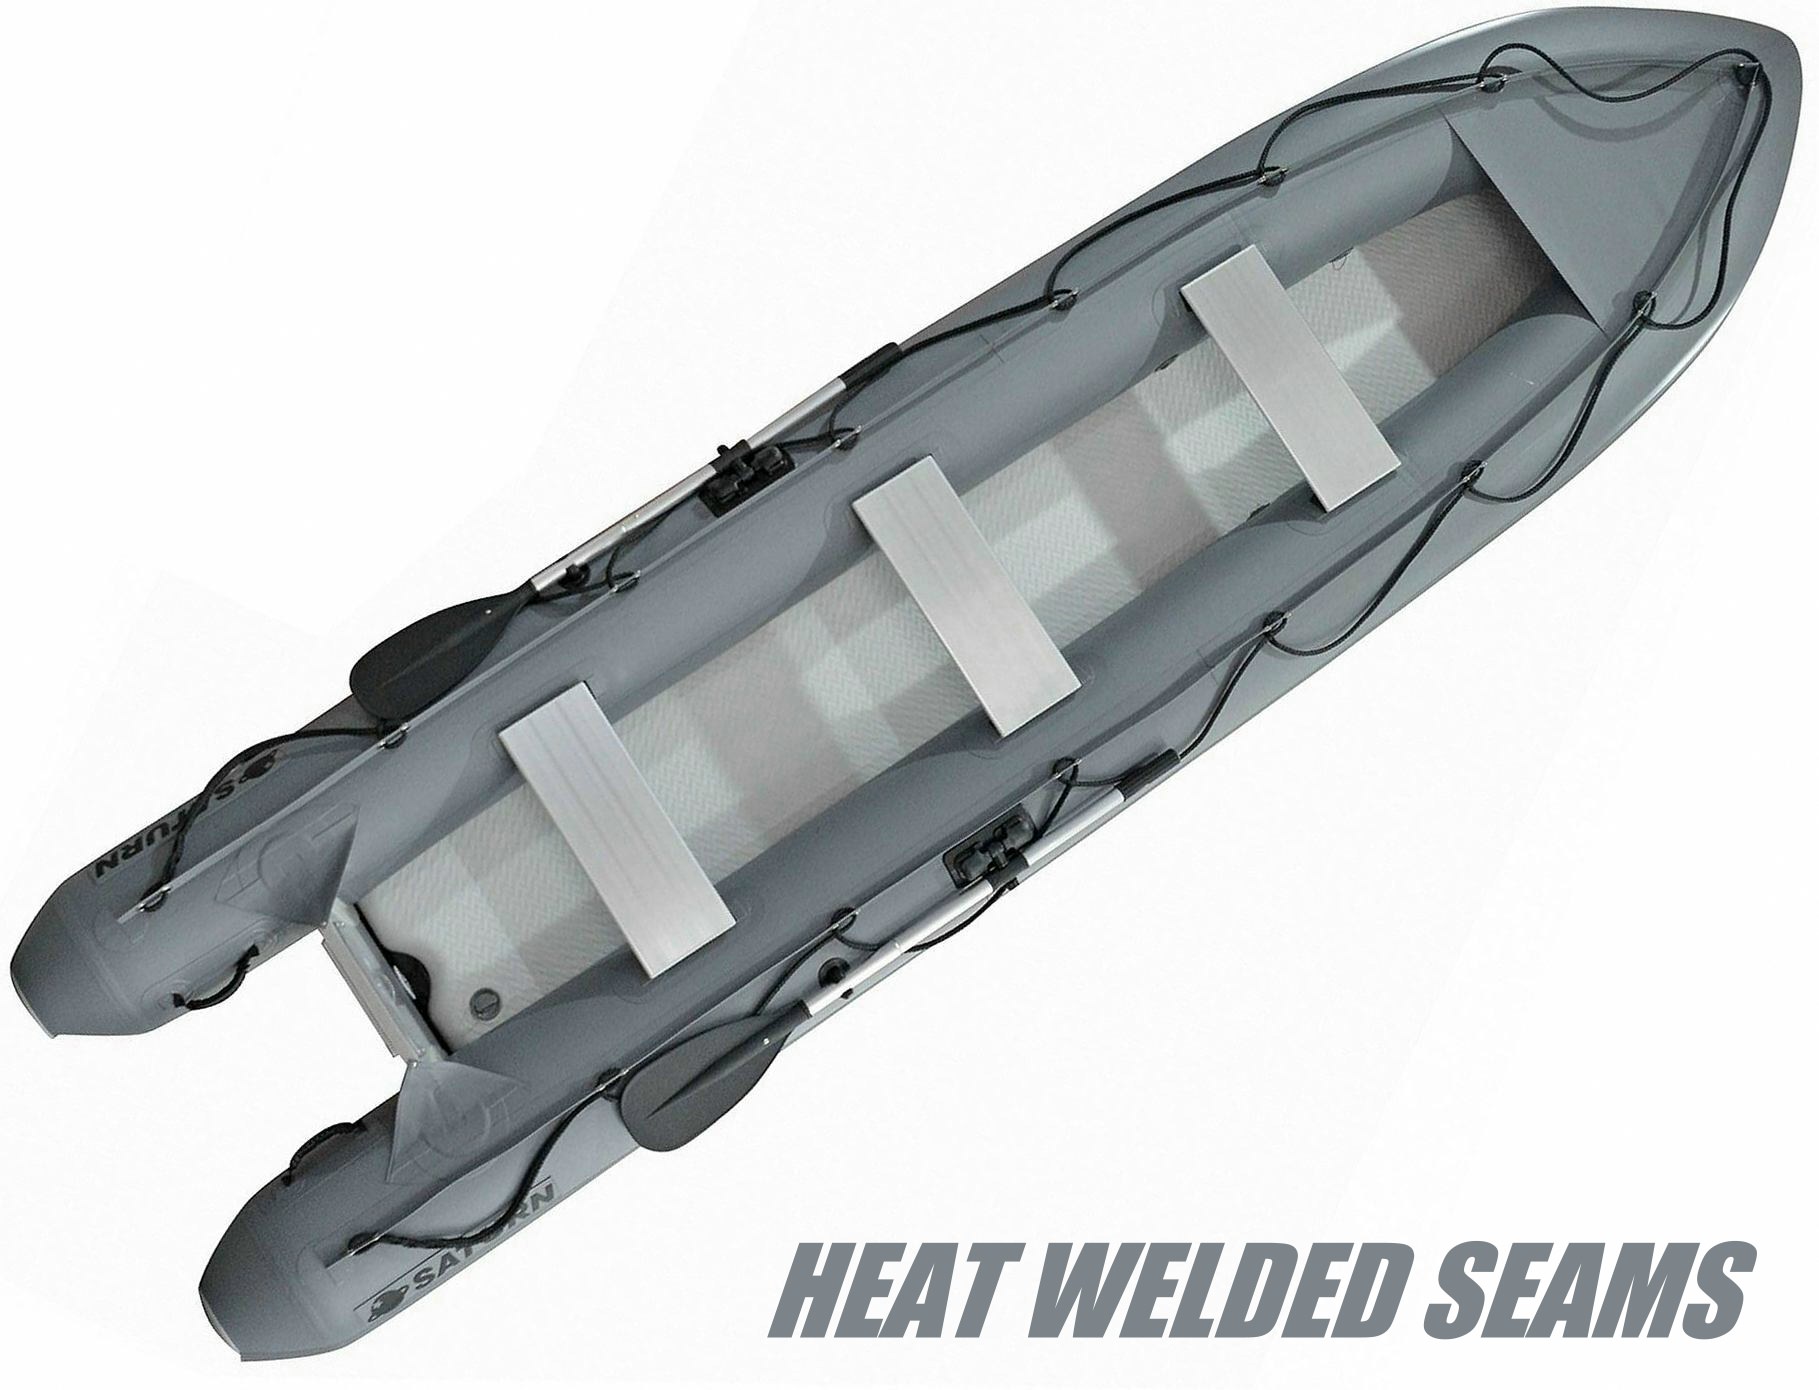 14' Inflatable Kayak + Inflatable Boat Crossover with heat welded seams  KaBoat SKH430.